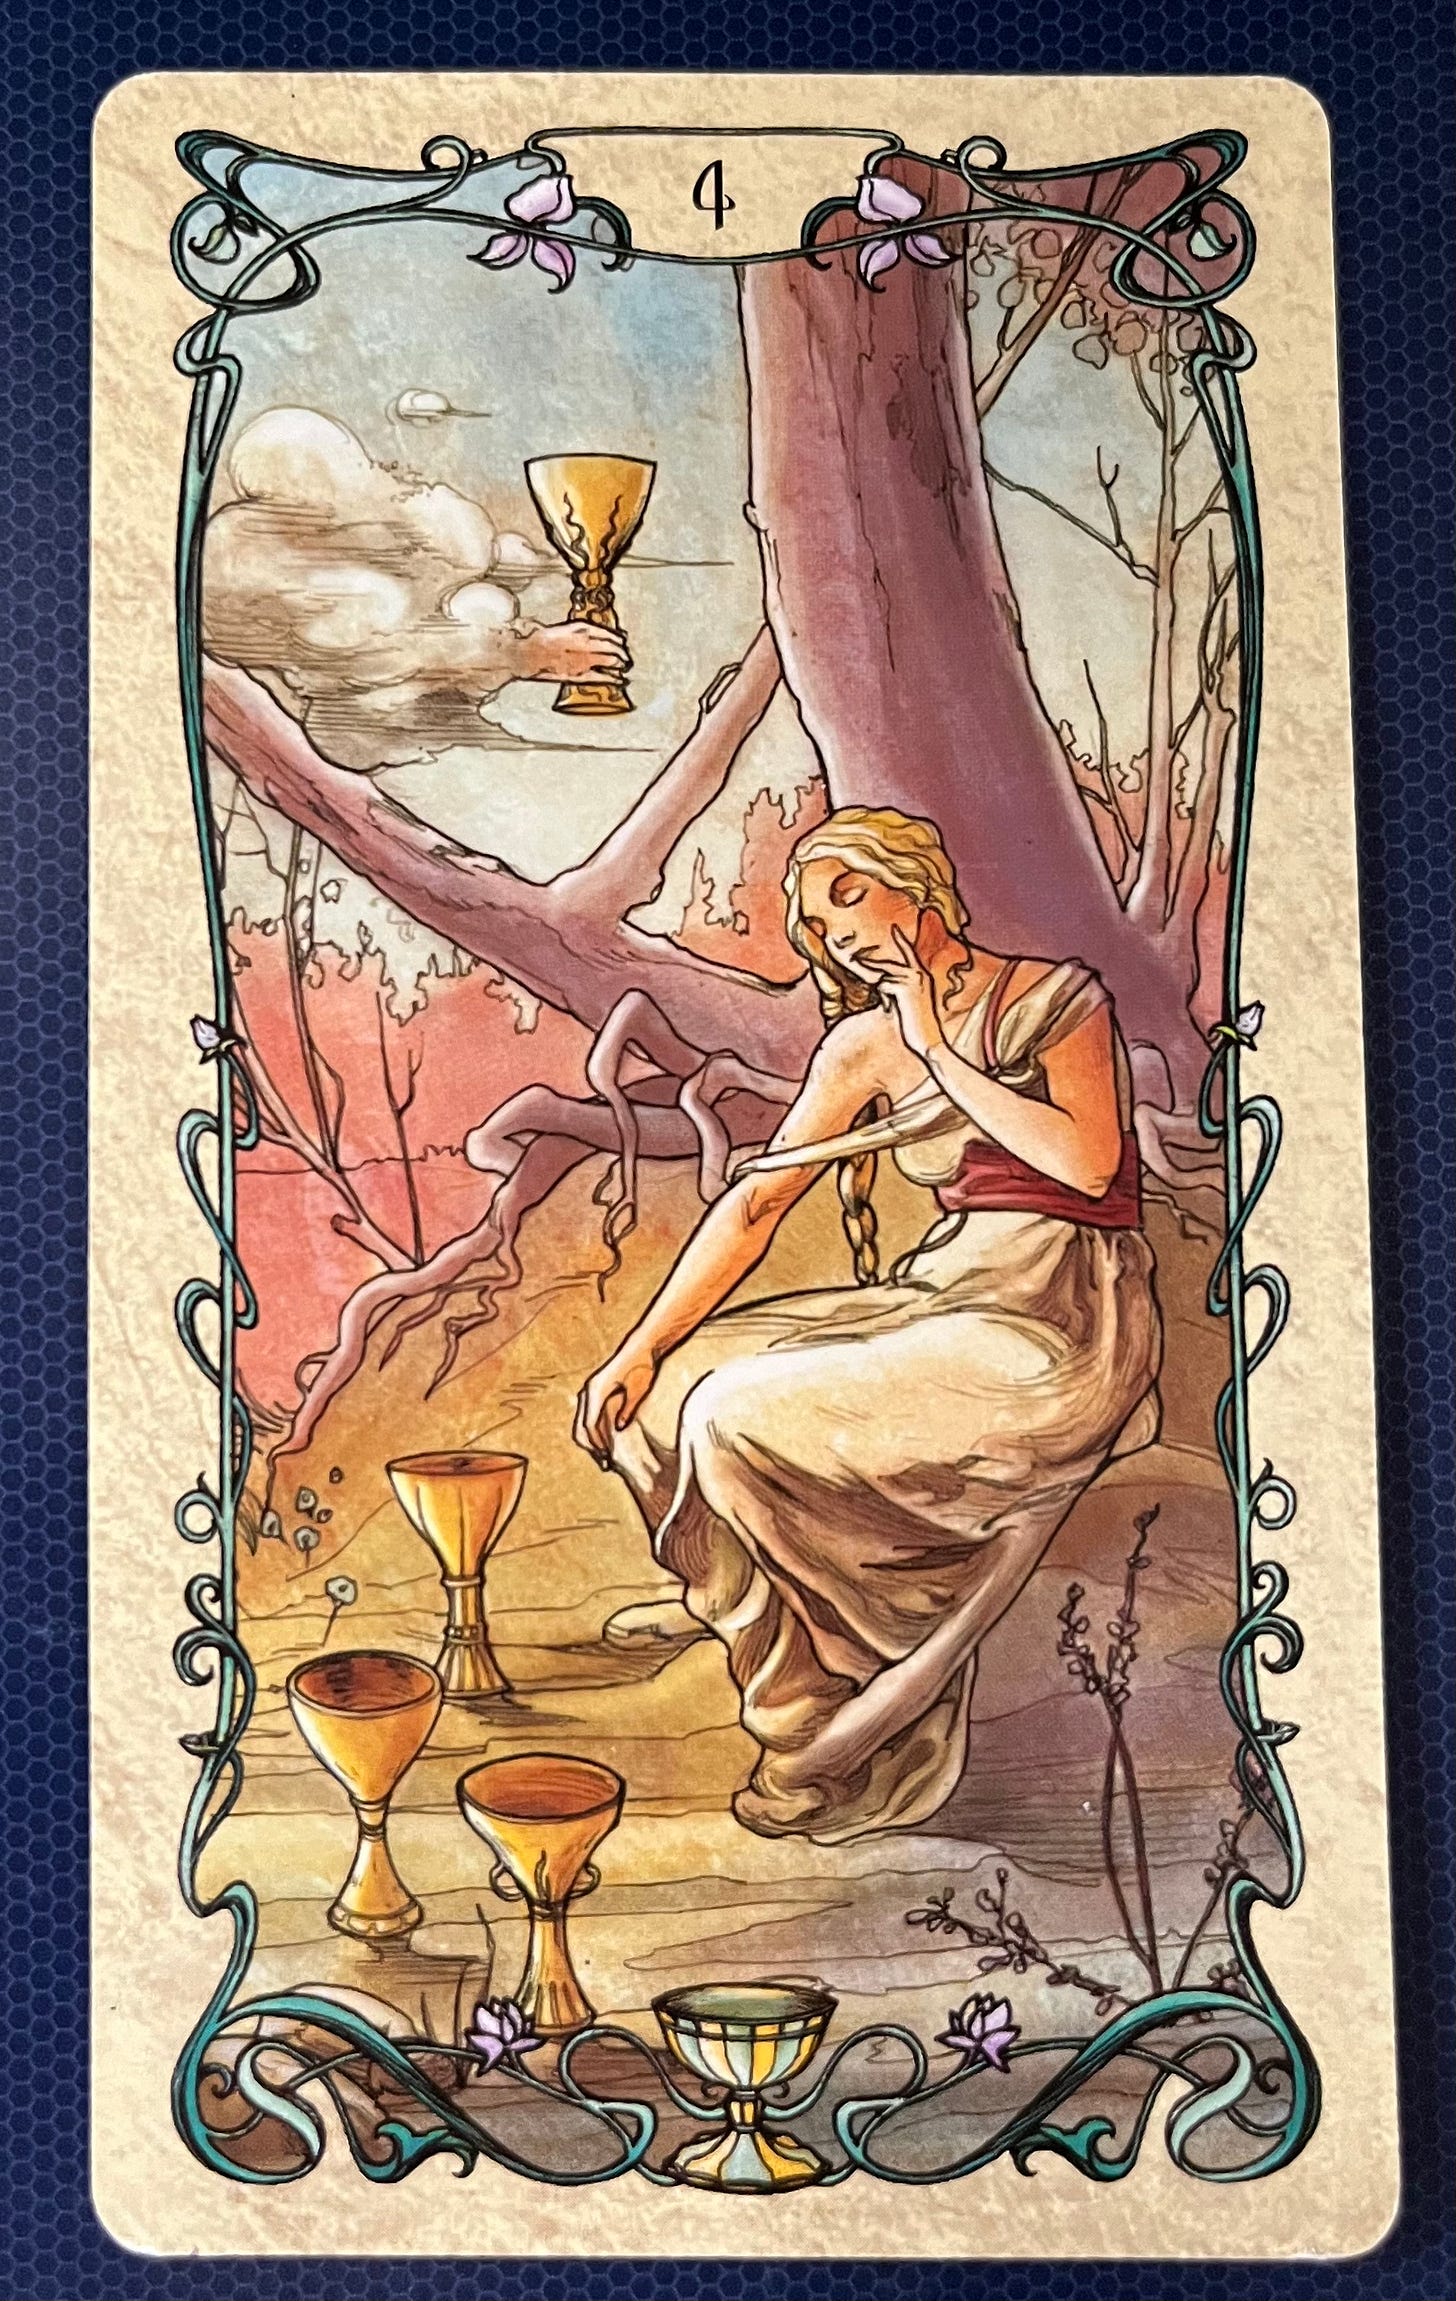 The image is of a tarot card specifically the four of cups with an ornate border and the number 4 at the top. The art is in the style of Mucha. It depicts a person sitting under a tree, appearing to be in deep thought or contemplation. The individual is wearing classical attire and holding their head with one hand. There are four cups around the individual; three on the ground and one being offered by a clouded hand emerging from the sky. The background shows bare trees and clouds, giving an autumnal or barren feel to the scene. The intricate border features vine-like decorations with small flowers interspersed throughout. 